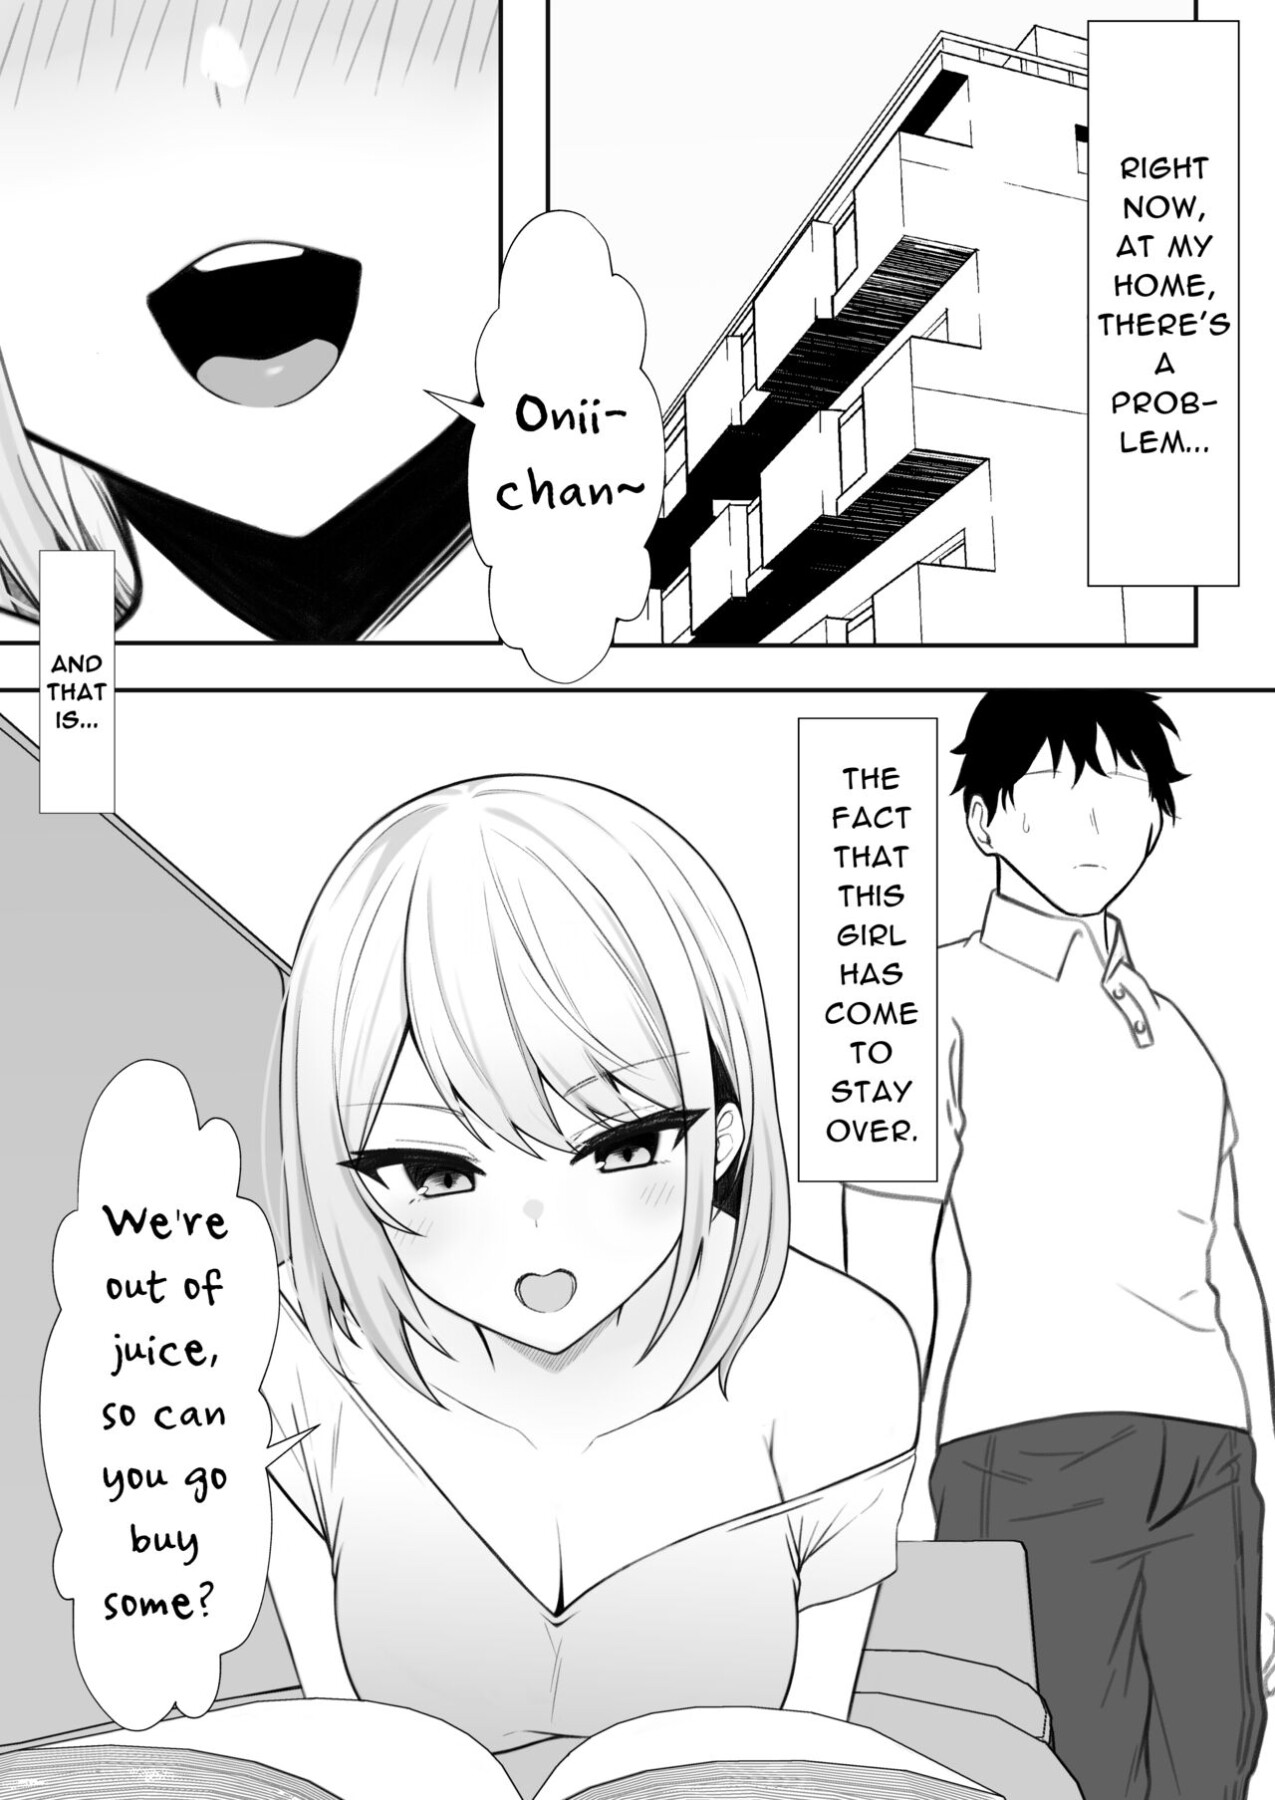 Hentai Manga Comic-My Sister-in-Law, Who is Visiting is Too Erotic, So I Fucked Her Without My Wife Knowing!-Read-2